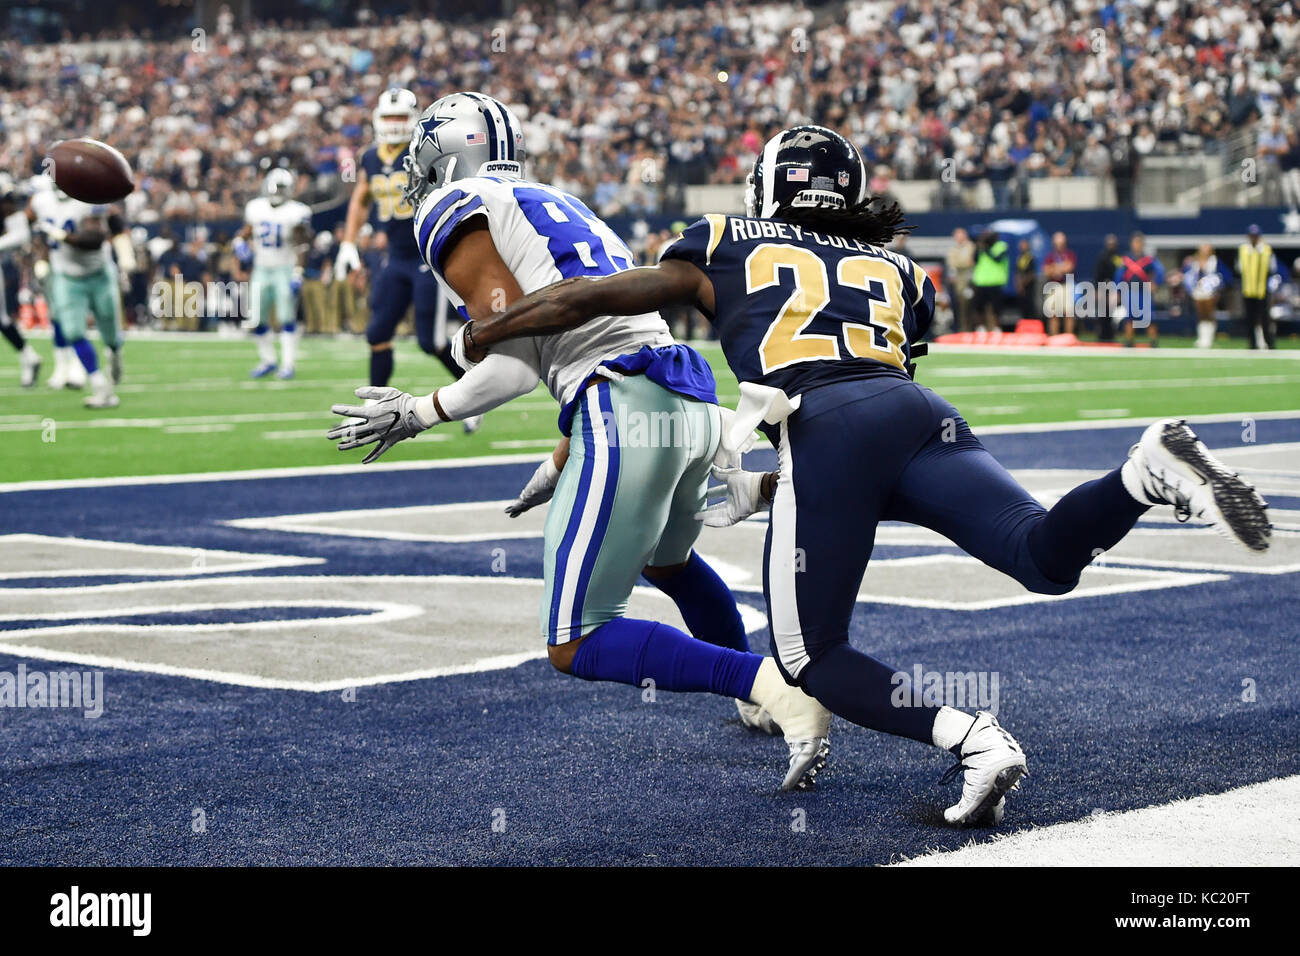 Arlington, Texas, USA. 1st Oct, 2017. Los Angeles Rams cornerback Nickell Robey-Coleman (23) breaks up a pass ended for Dallas Cowboys wide receiver Terrance Williams (83) in the second half of the NFL football game between the Los Angeles Rams and the Dallas Cowboys at AT&T Stadium in Arlington, Texas. The Los Angeles Rams defeated theDallas Cowboys 35-30. Shane Roper/CSM/Alamy Live News Stock Photo